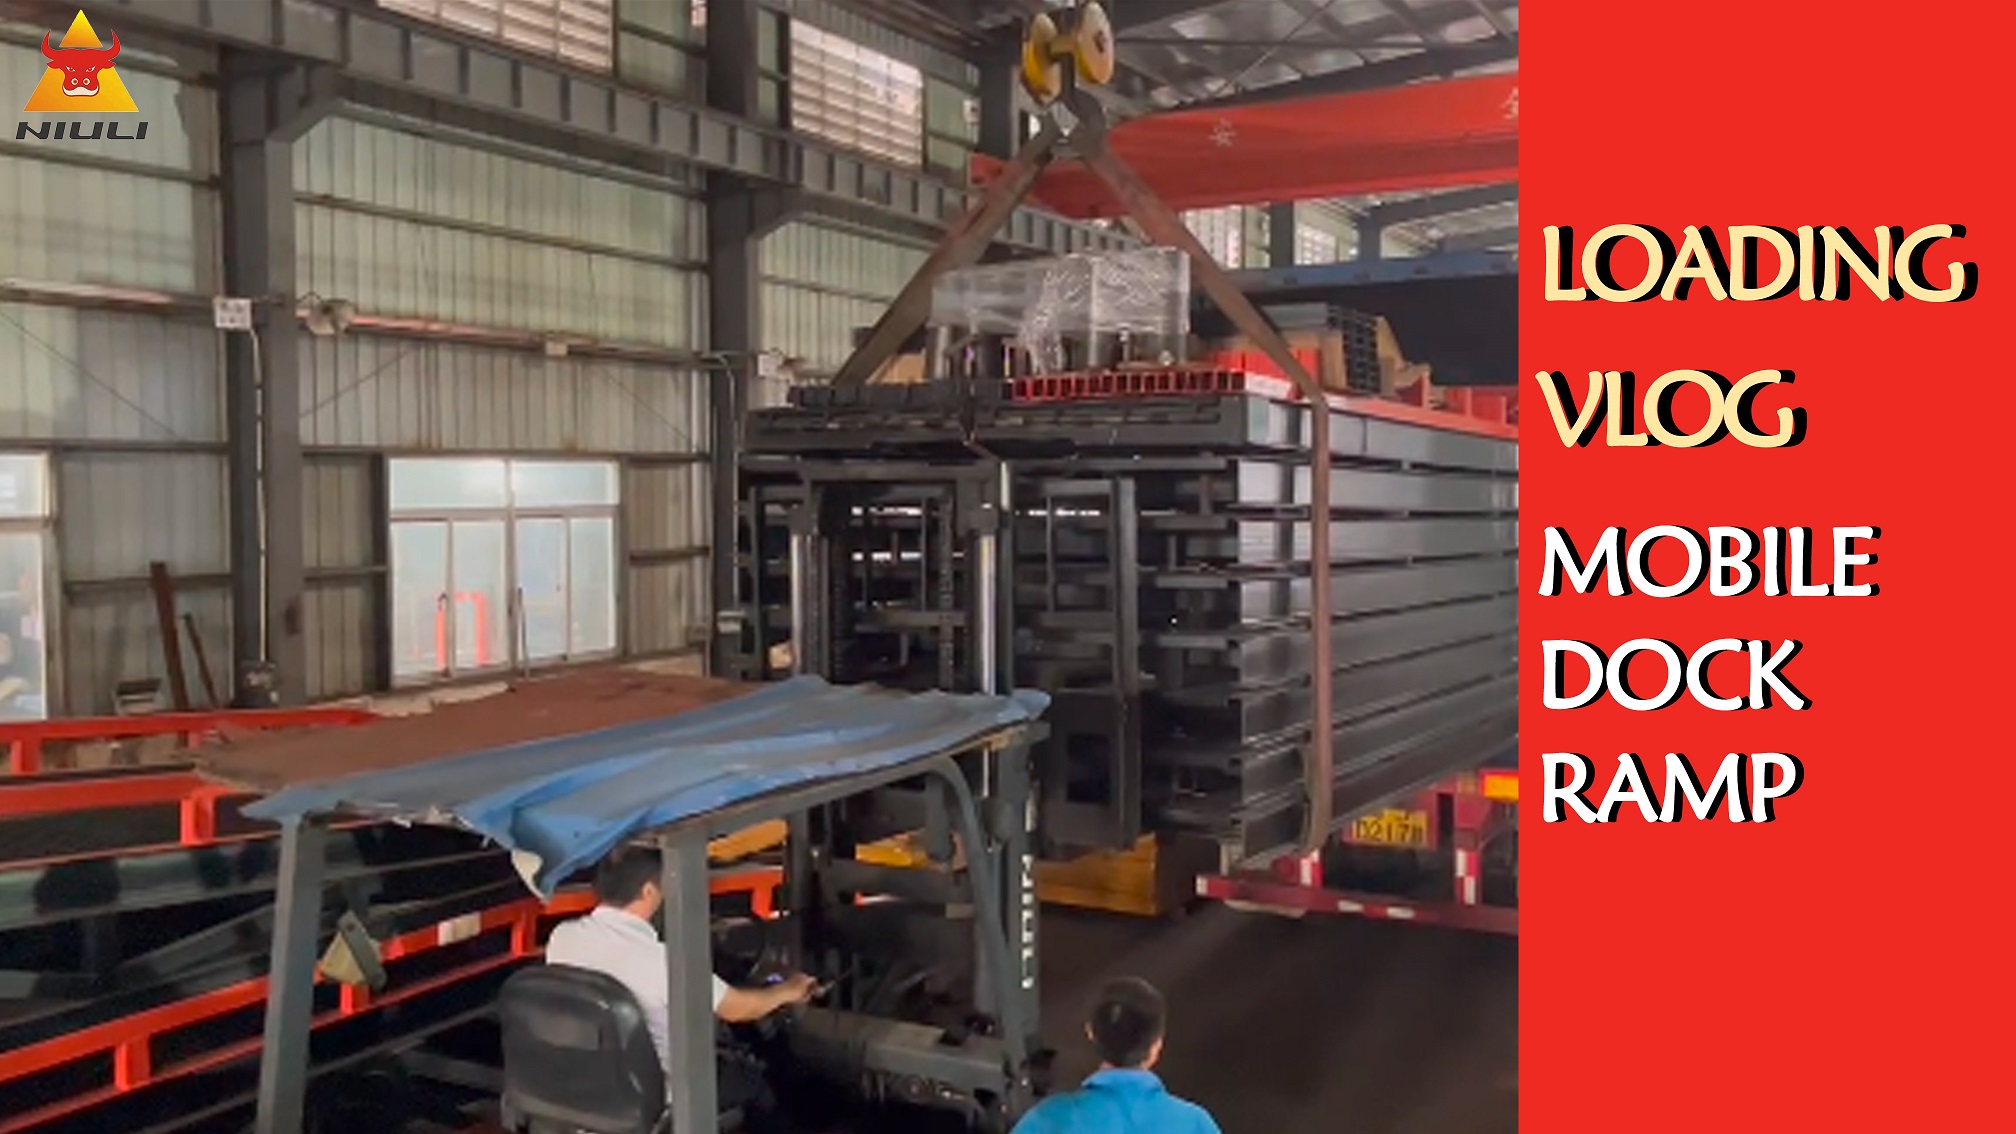 Does a Loading Dock Ramp Require Rails?